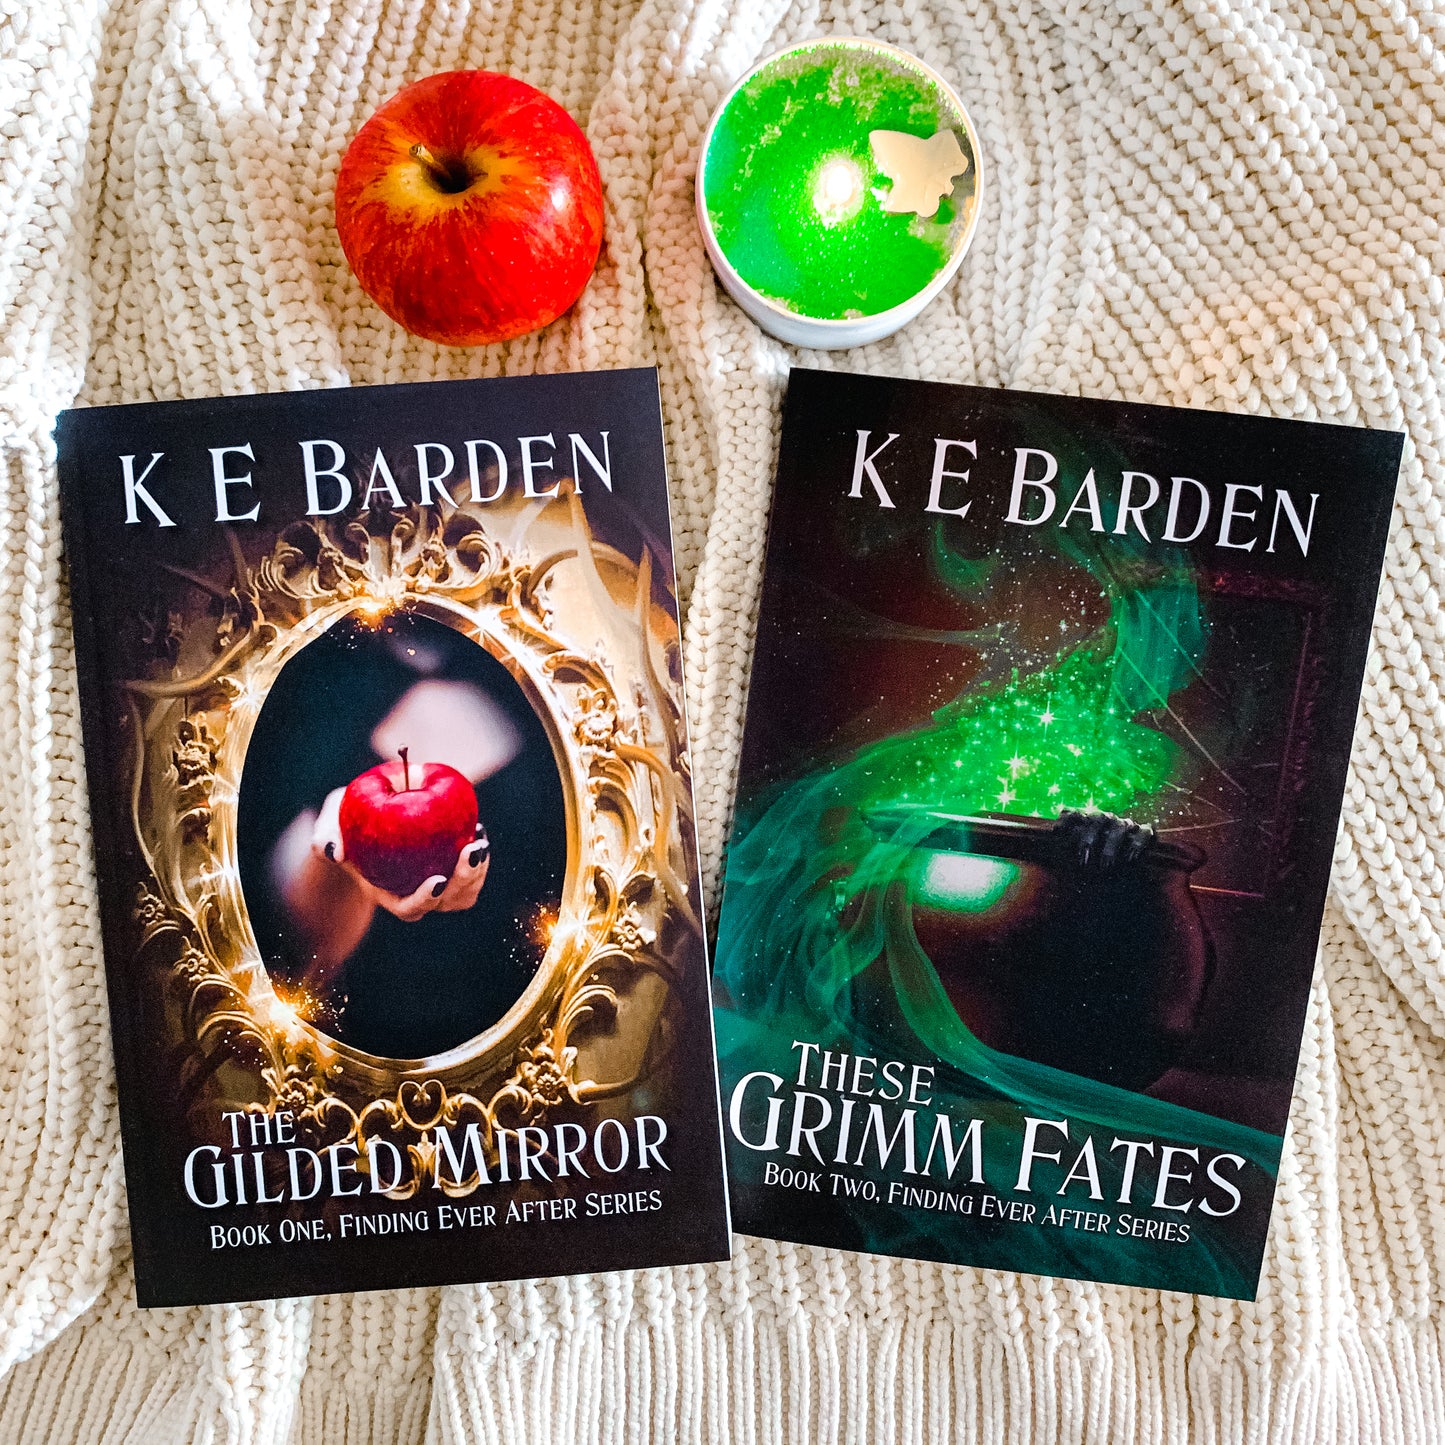 Finding Ever After Series by K E Barden